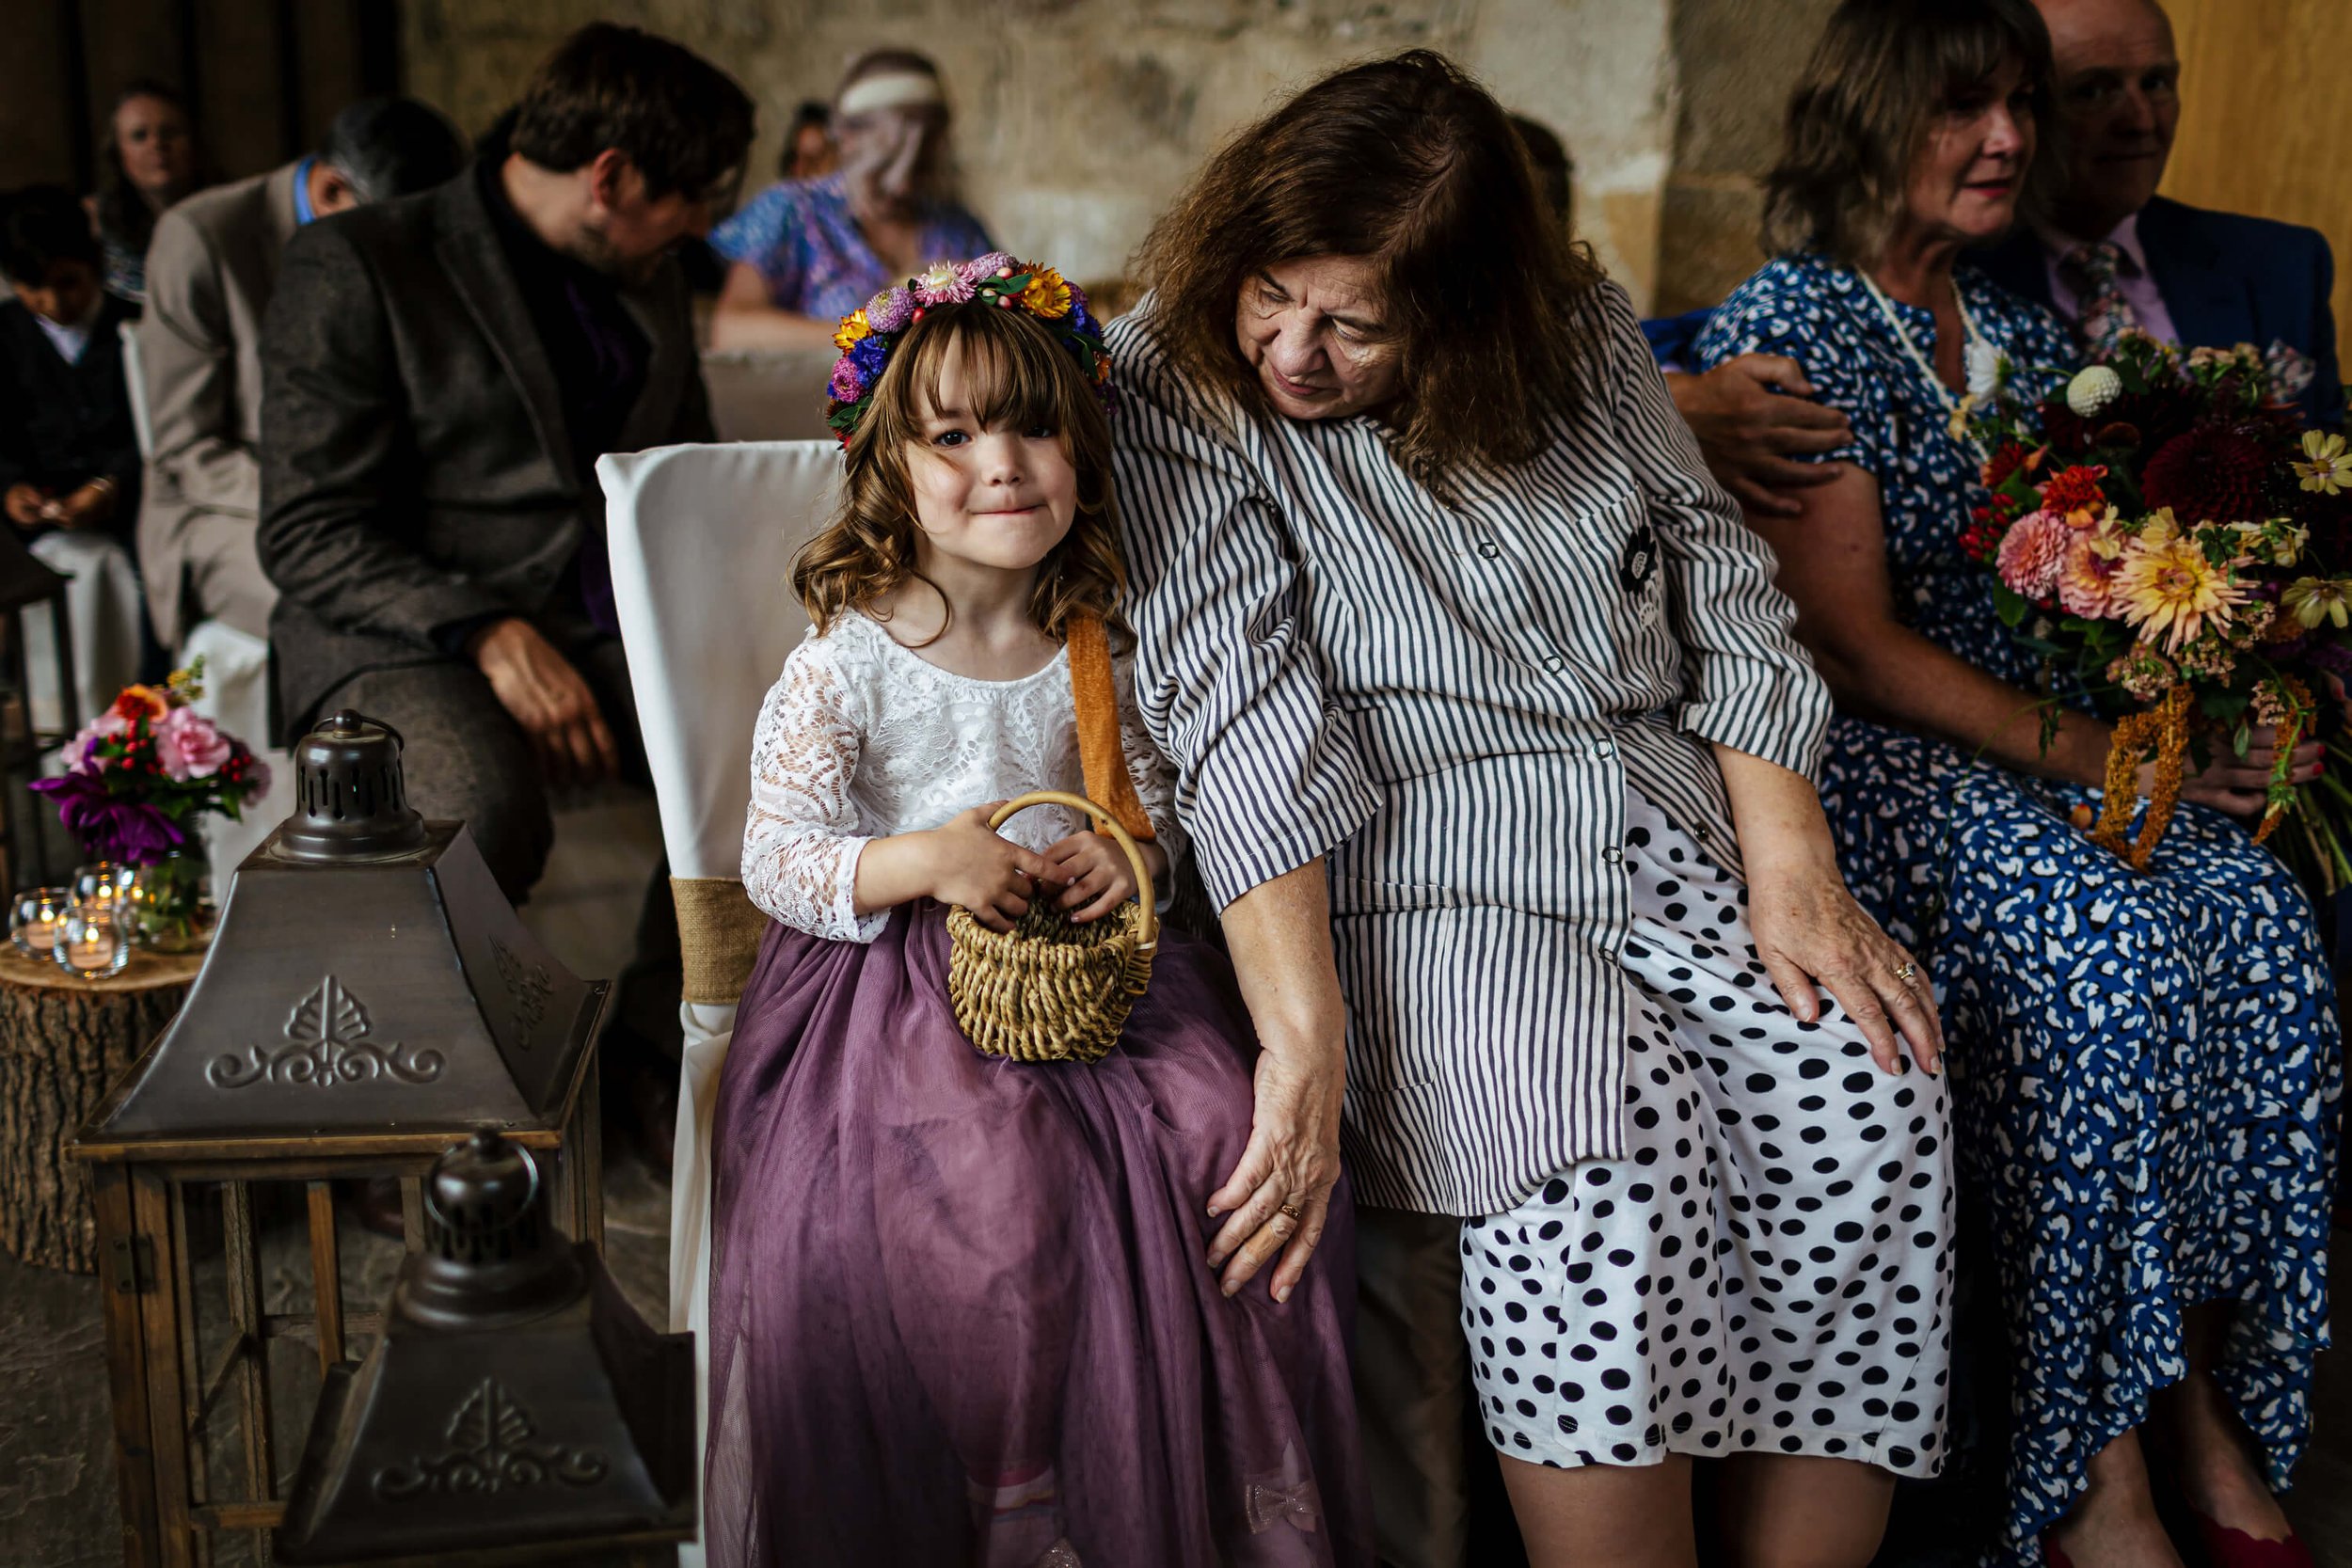 Flower girl smiling during the wedding service at Barden Tower